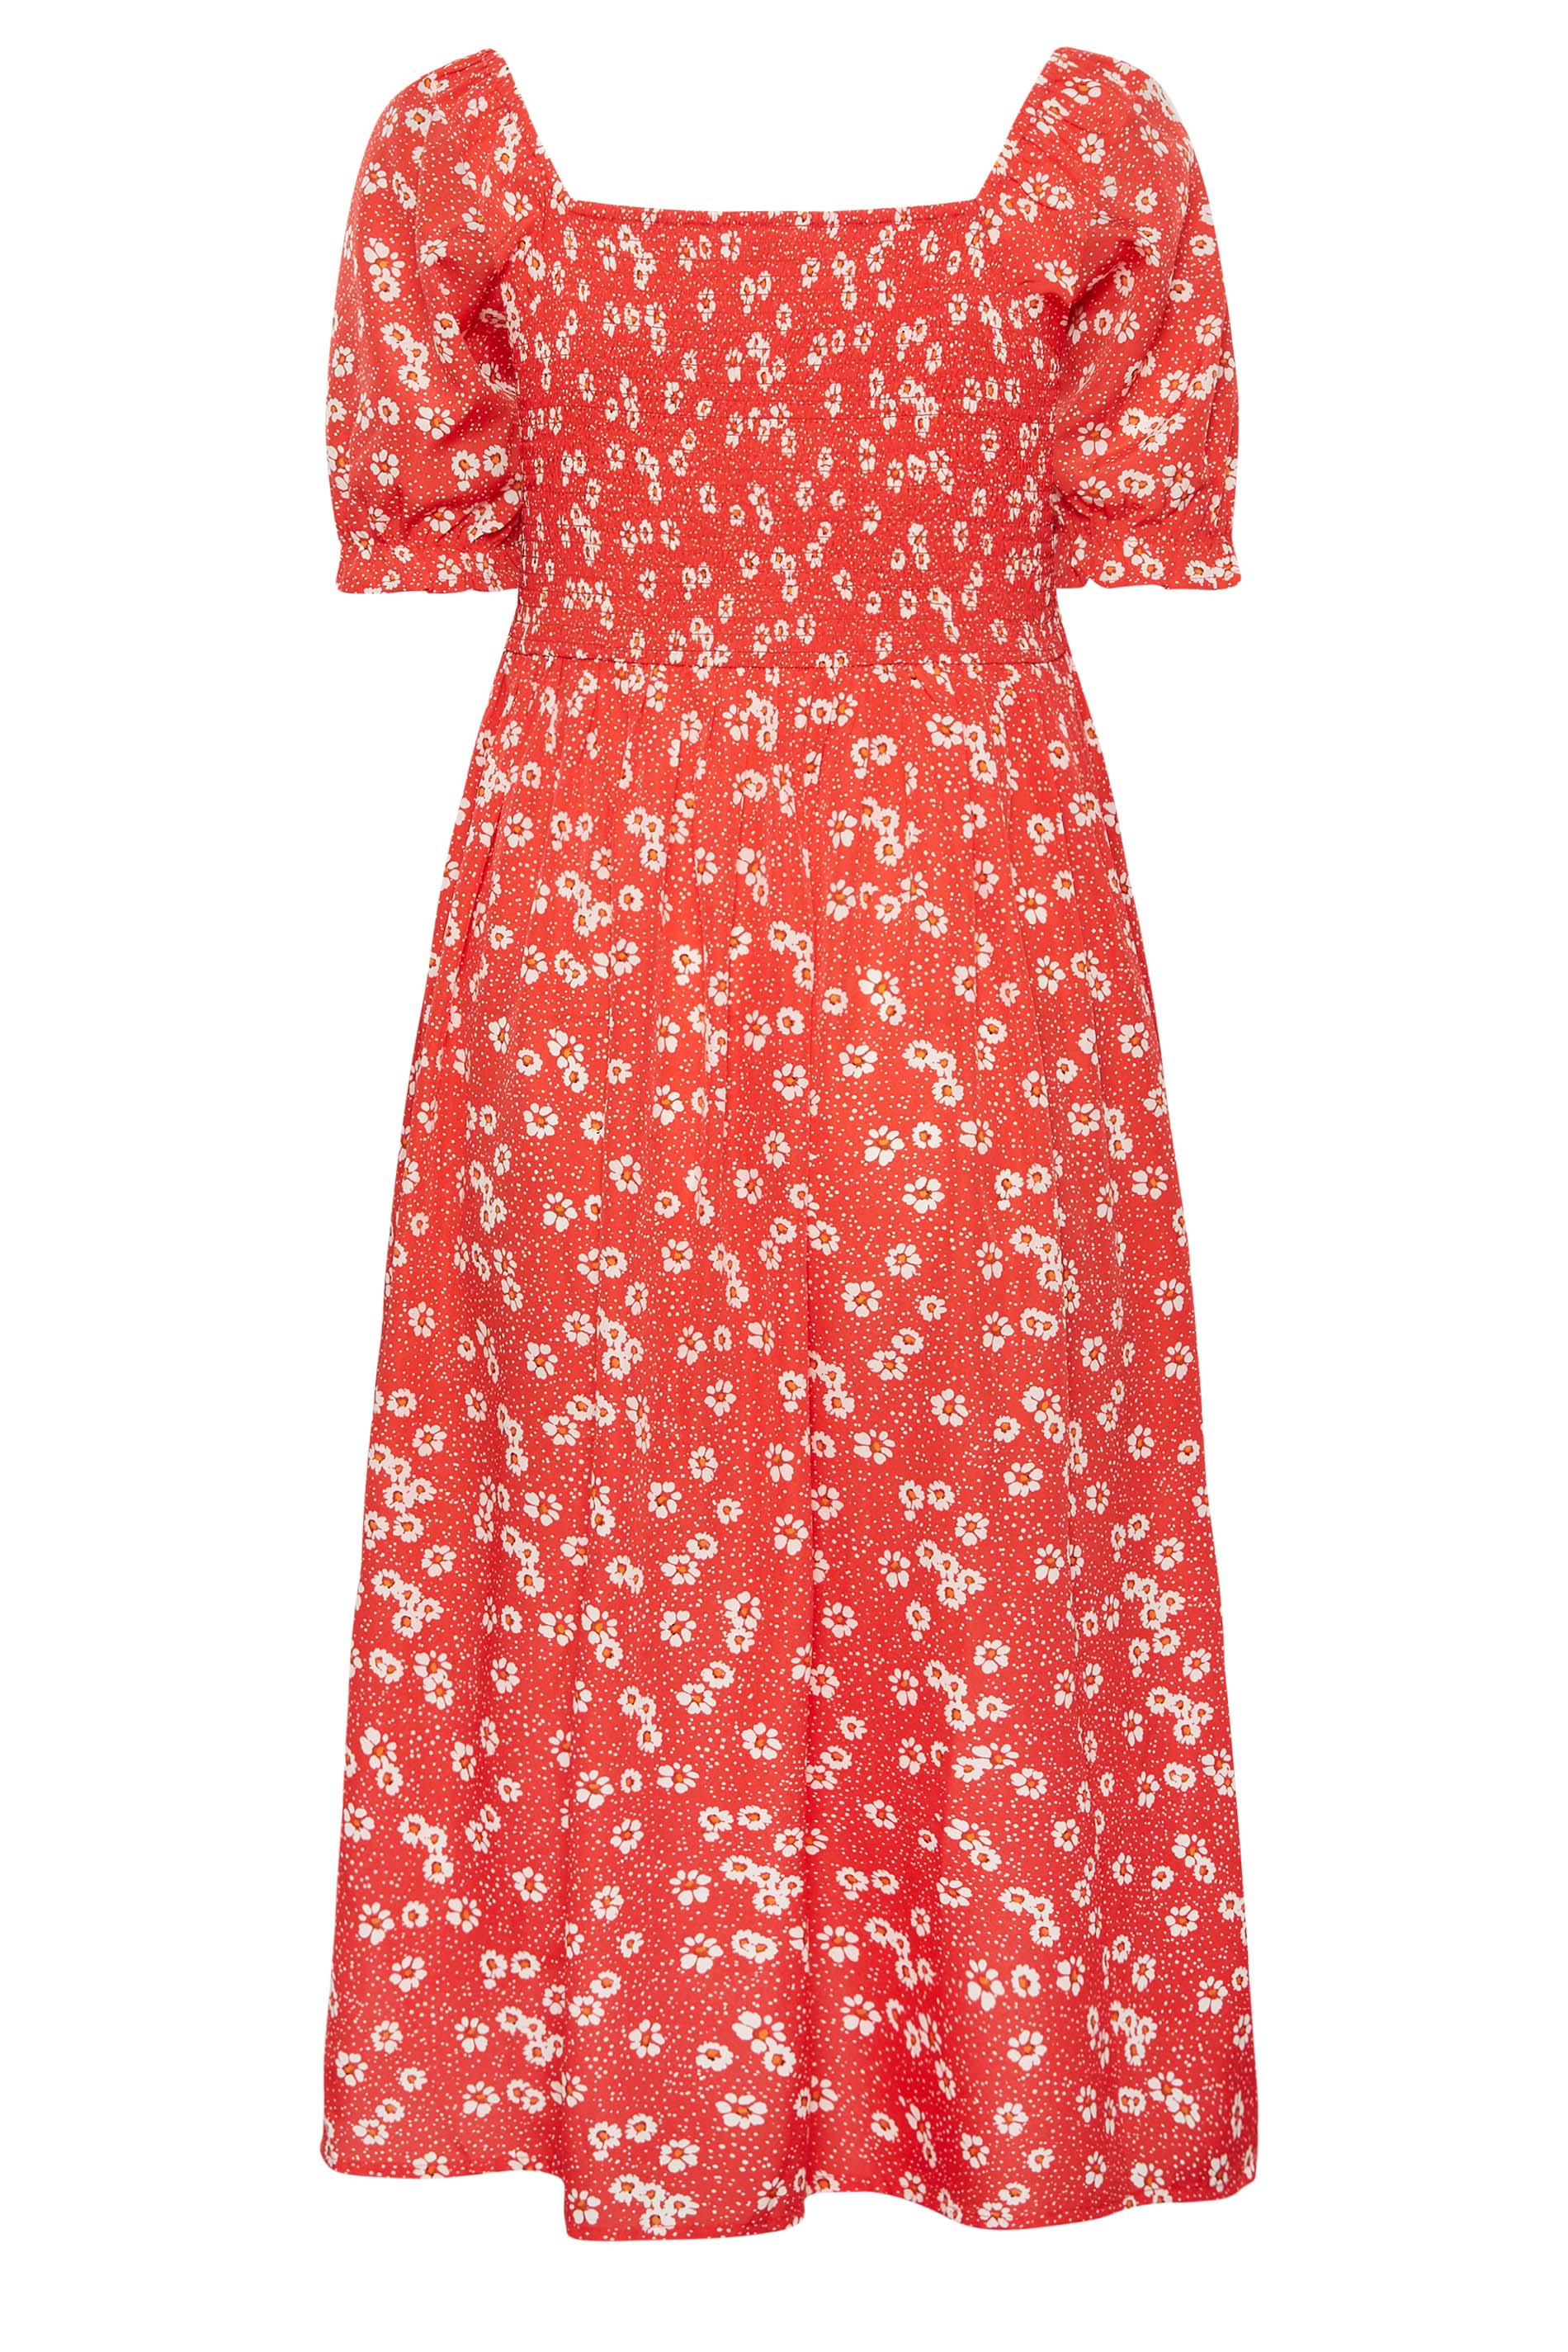 YOURS Curve Red Daisy Print Shirred Maxi Dress | Yours Clothing